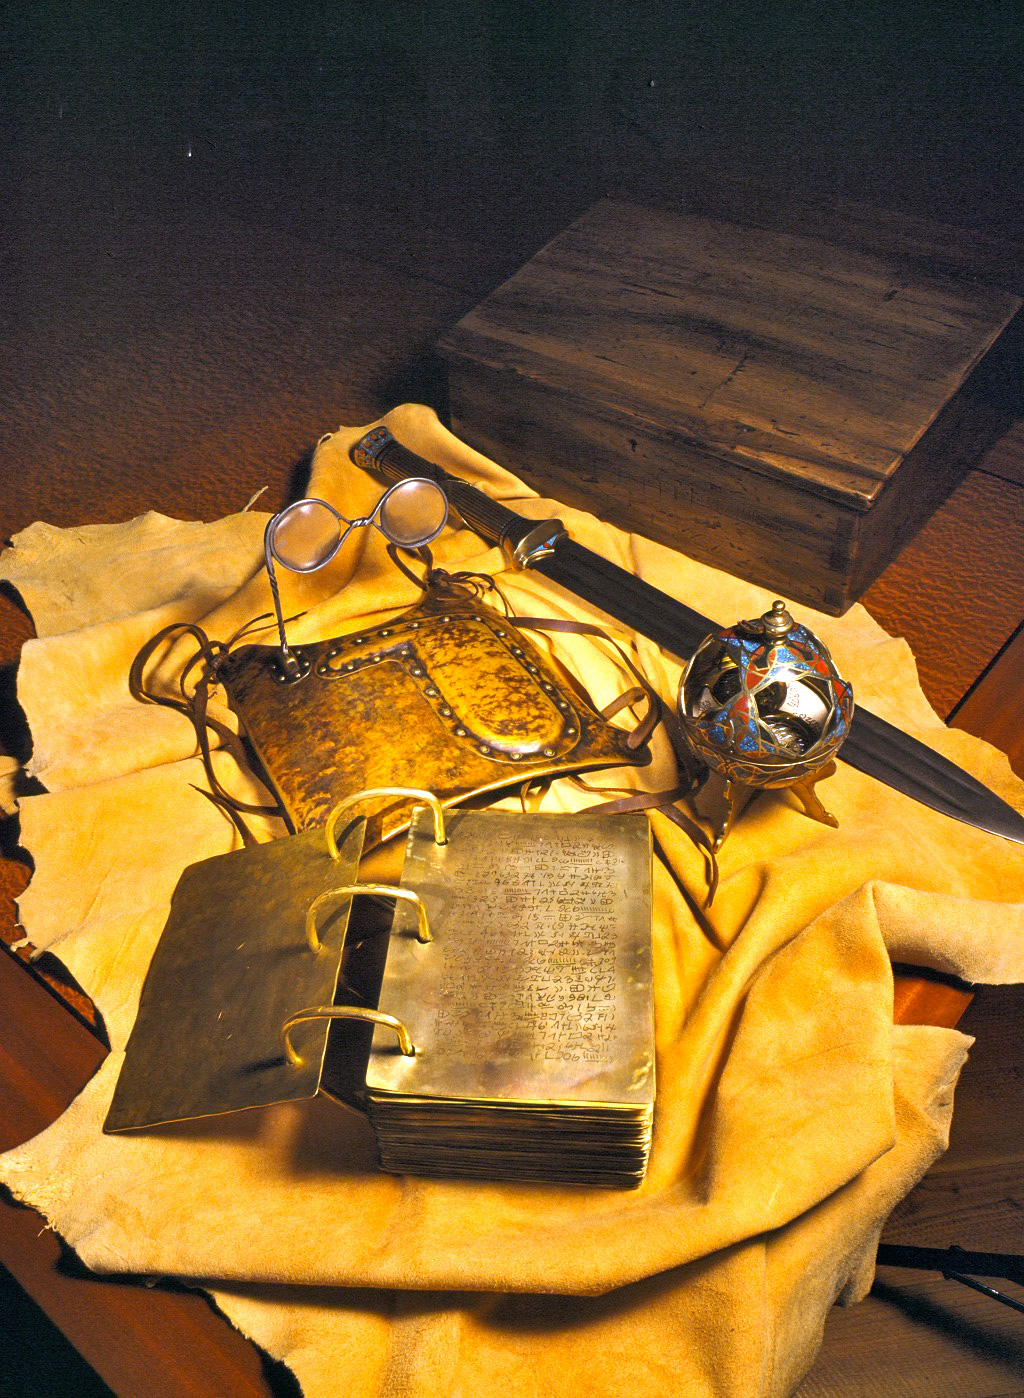 Several facsimiles of Book of Mormon artifacts sit on a piece of what looks like animal leather. The facsimiles include the breastplate with the Urim and Thummim, the sword of Laban, the Liahona, and the golden plates.